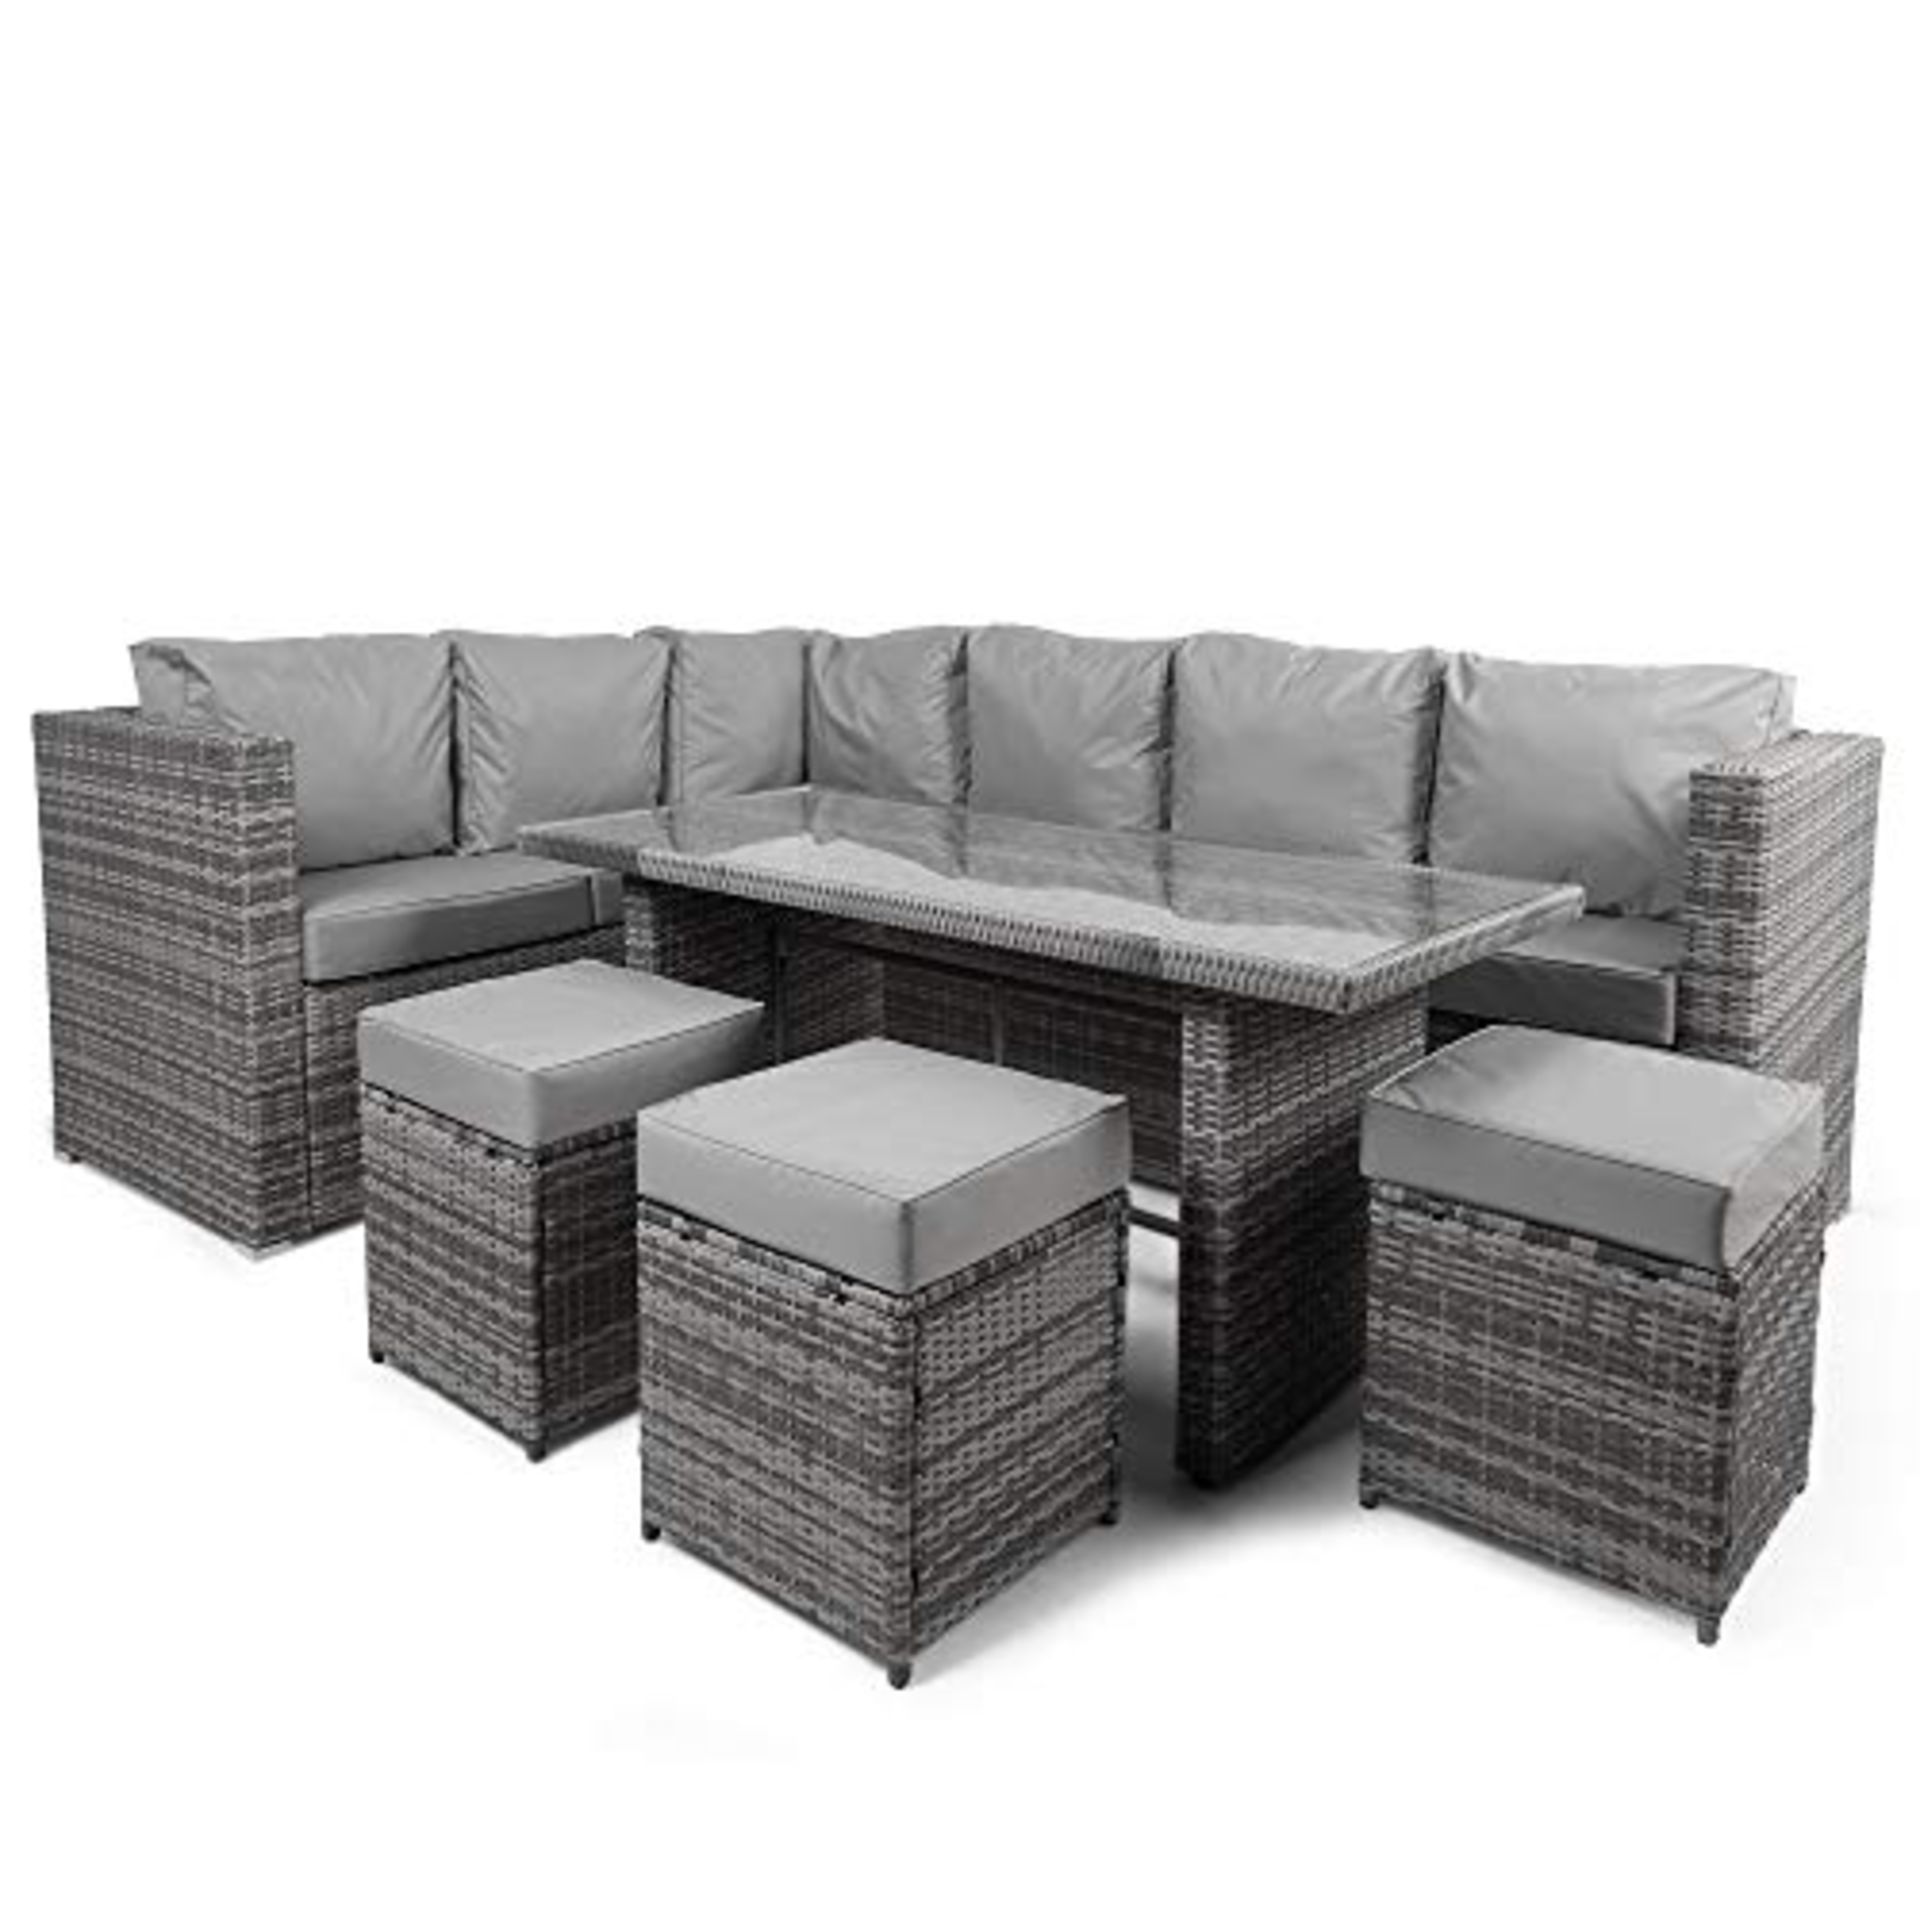 Rattan Corner sofa dining set, we have tried to check as best as we can and the set appears to